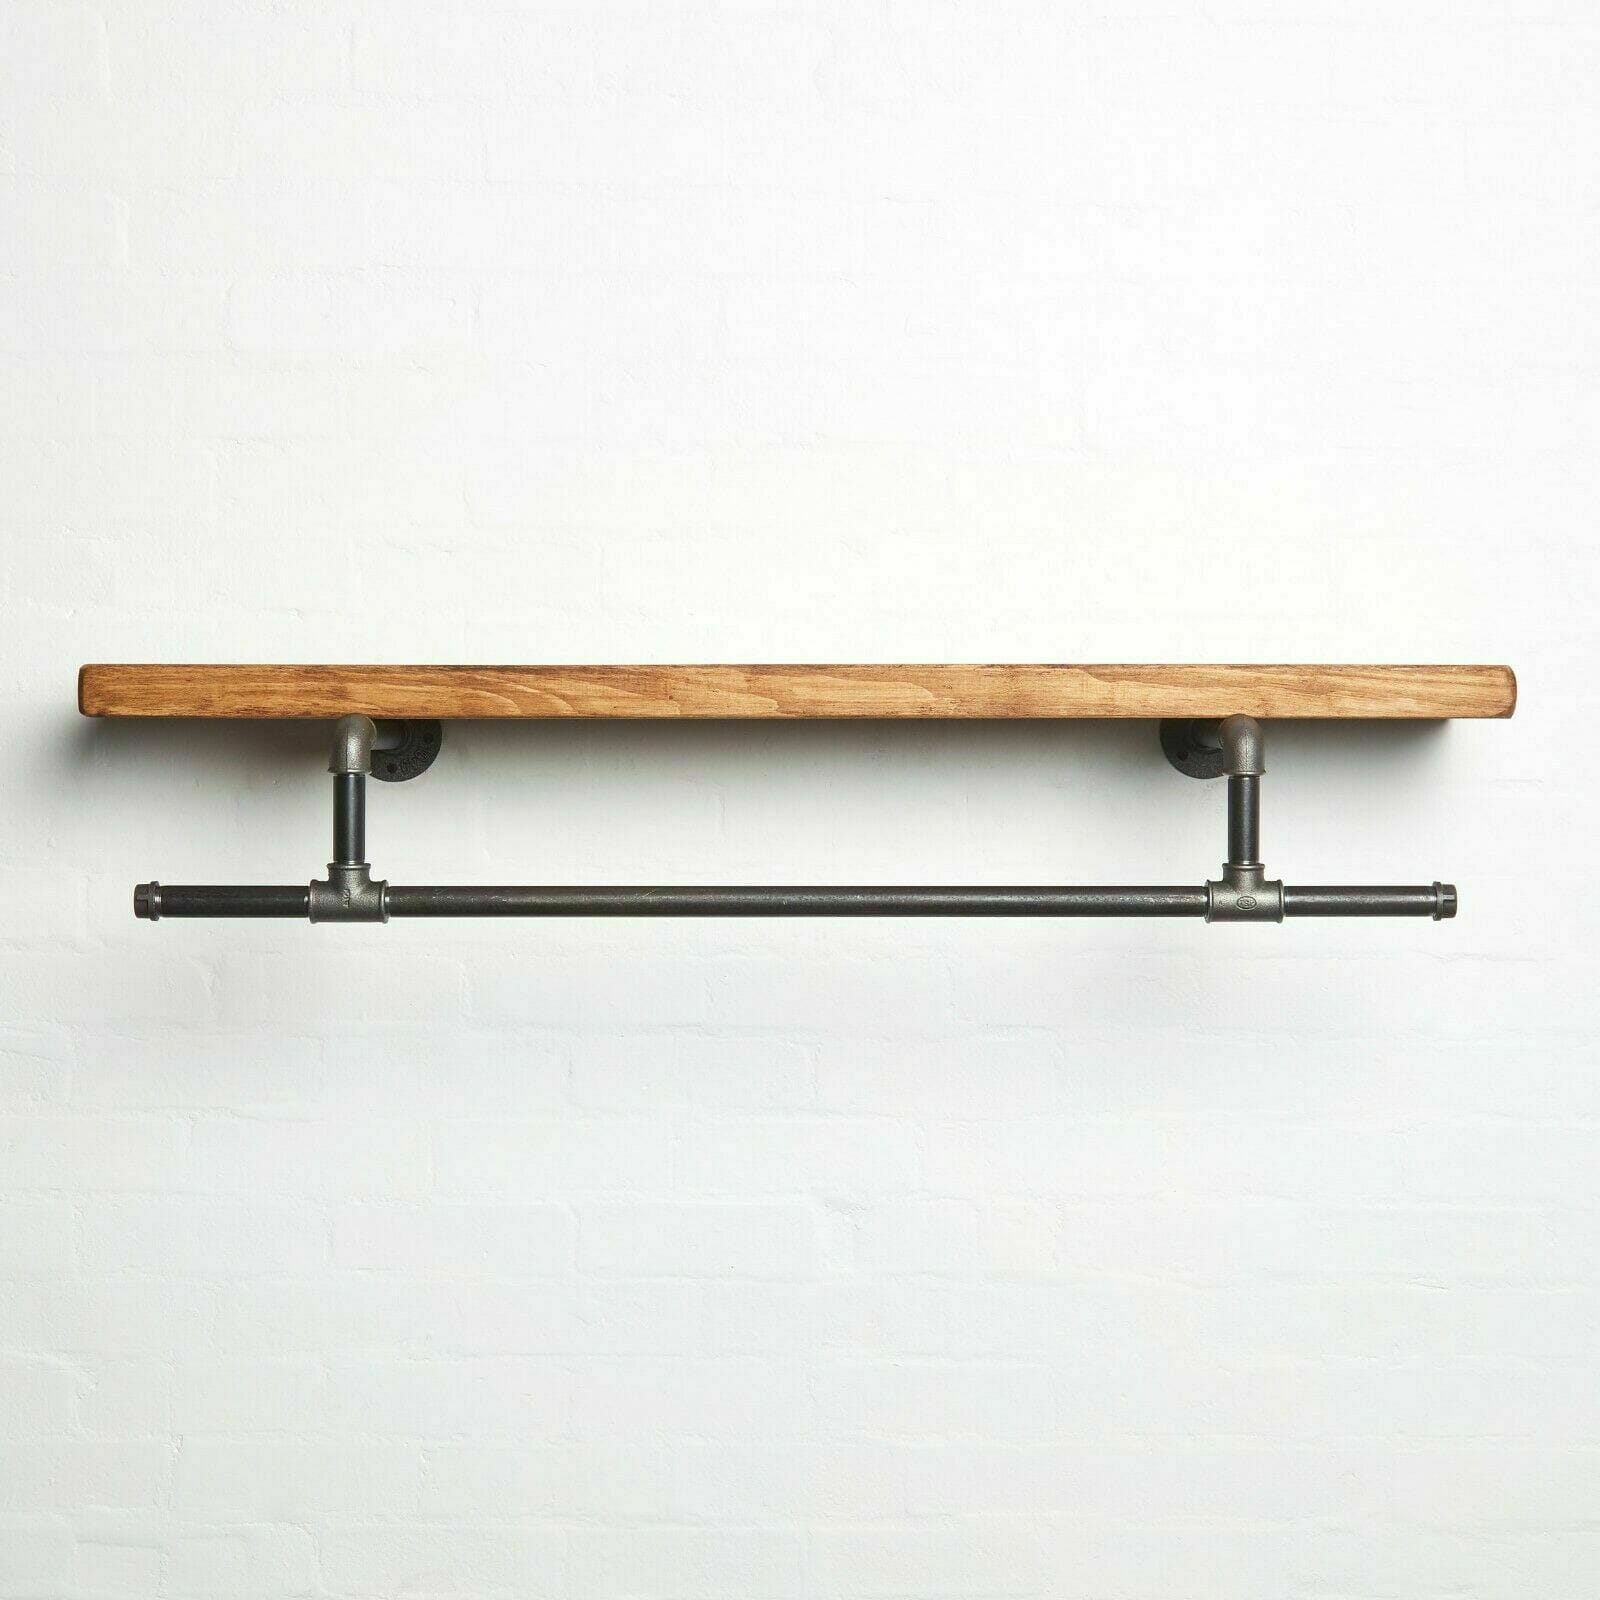 Clothes -Rail-with-Solid-wood-Shelf